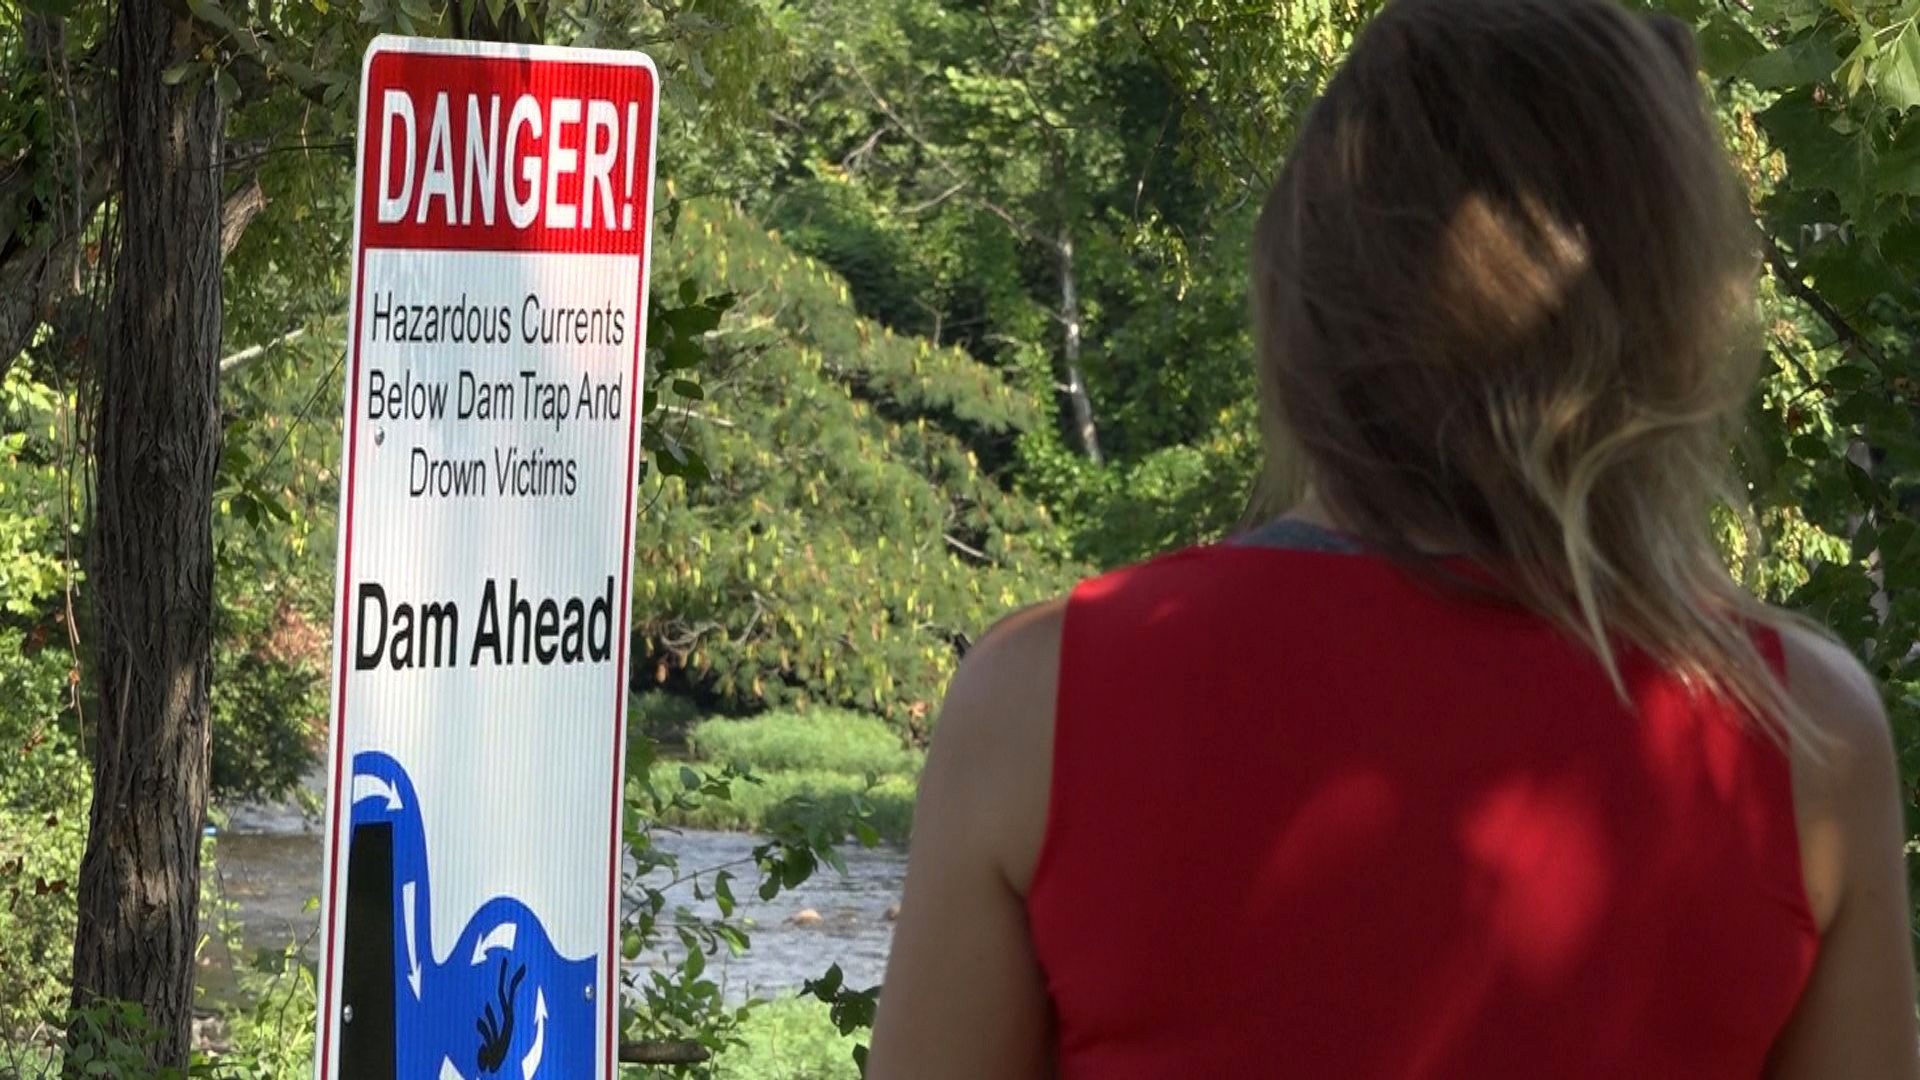 The mother of a girl who drowned at a dangerous dam gets the warning signs she wanted. The signs will alert others to the deceptive deadly currents that killed her daughter.